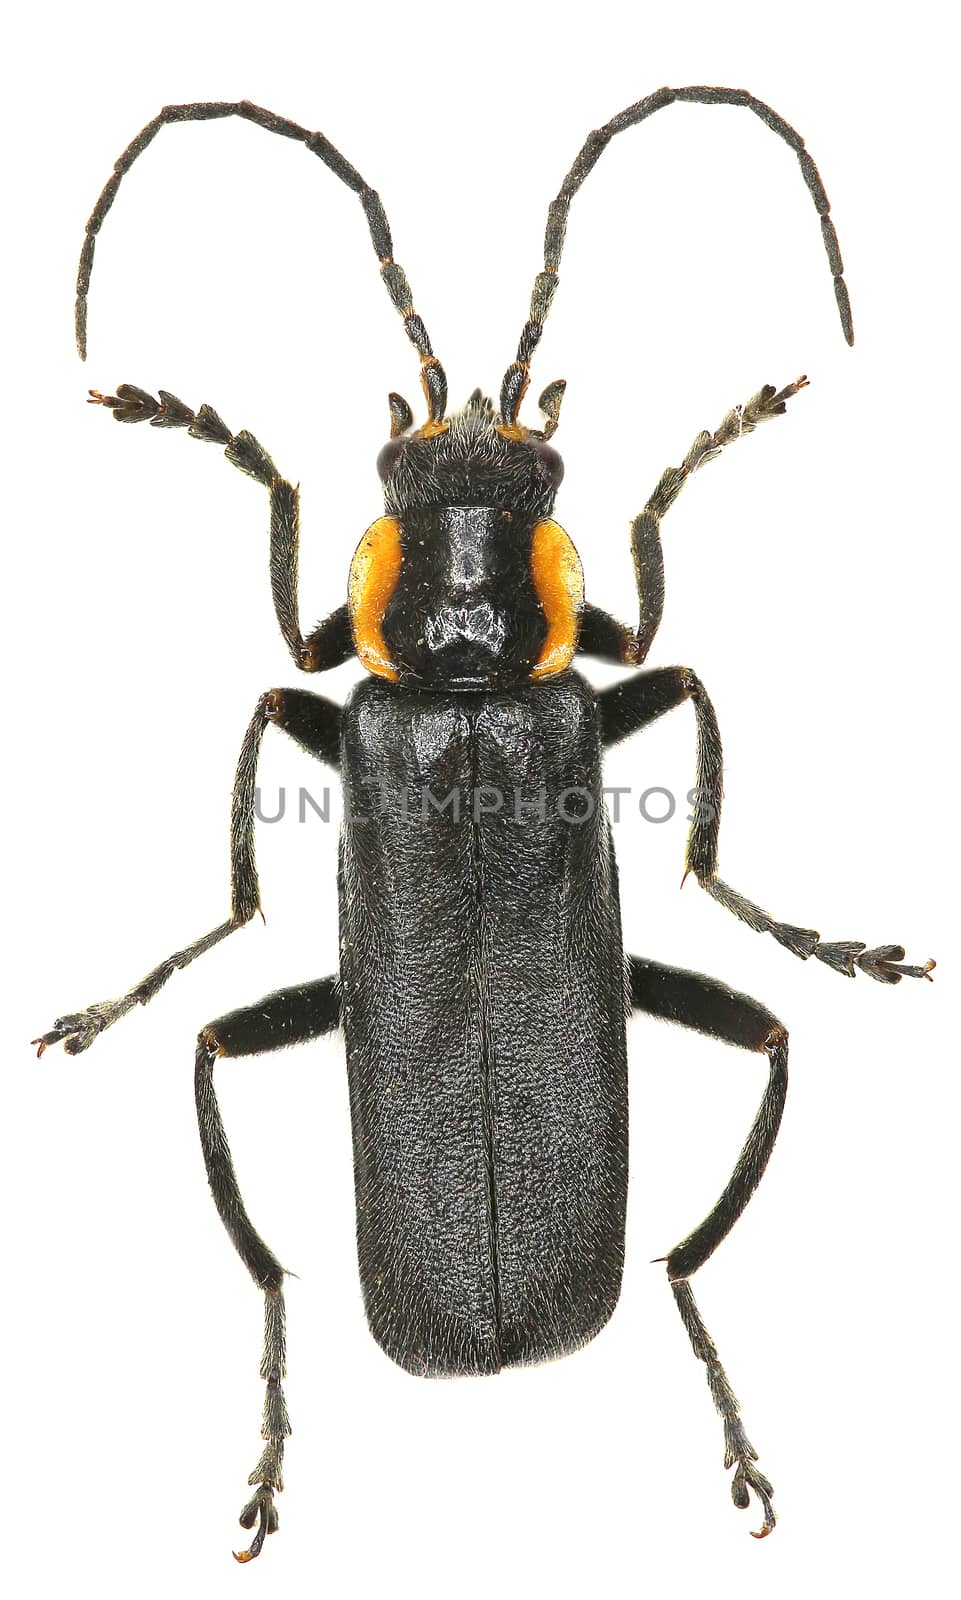 Black Soldier Beetle on white Background  -  Cantharis obscura (Linnaeus, 1758)